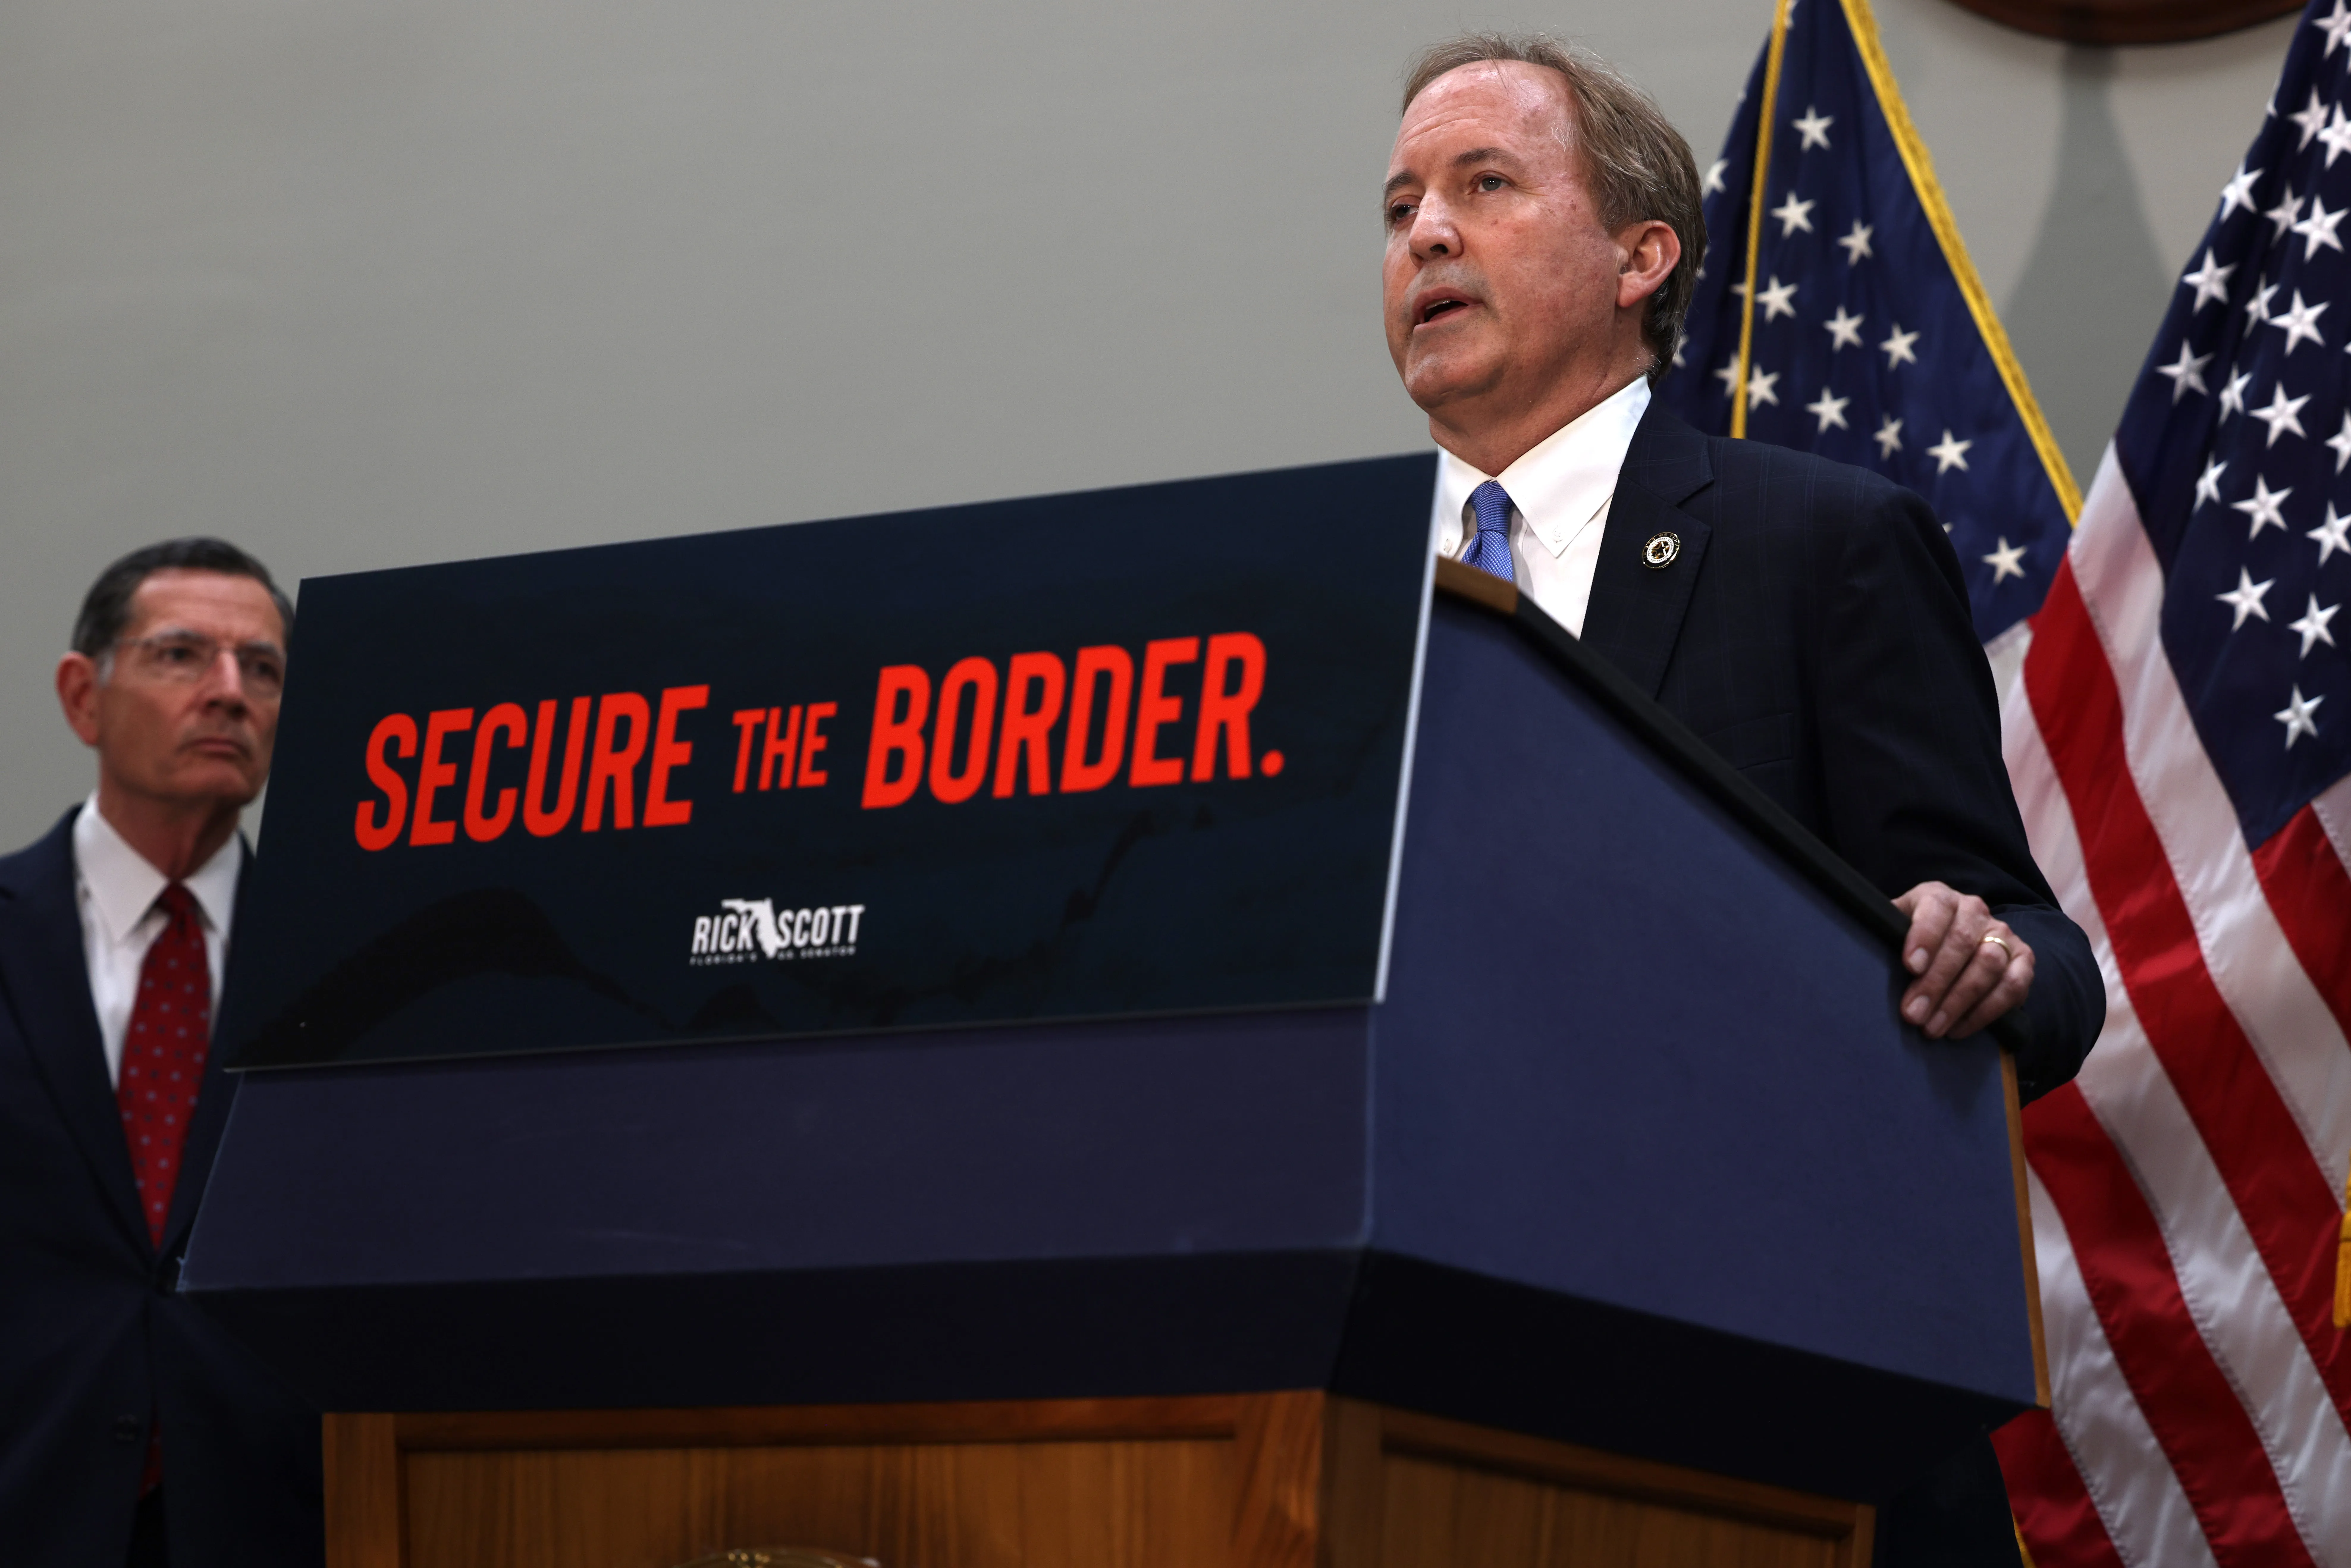 Texas Attorney General Ken Paxton speaks at a news conference in Washington, D.C., on May 12, 2021.?w=200&h=150